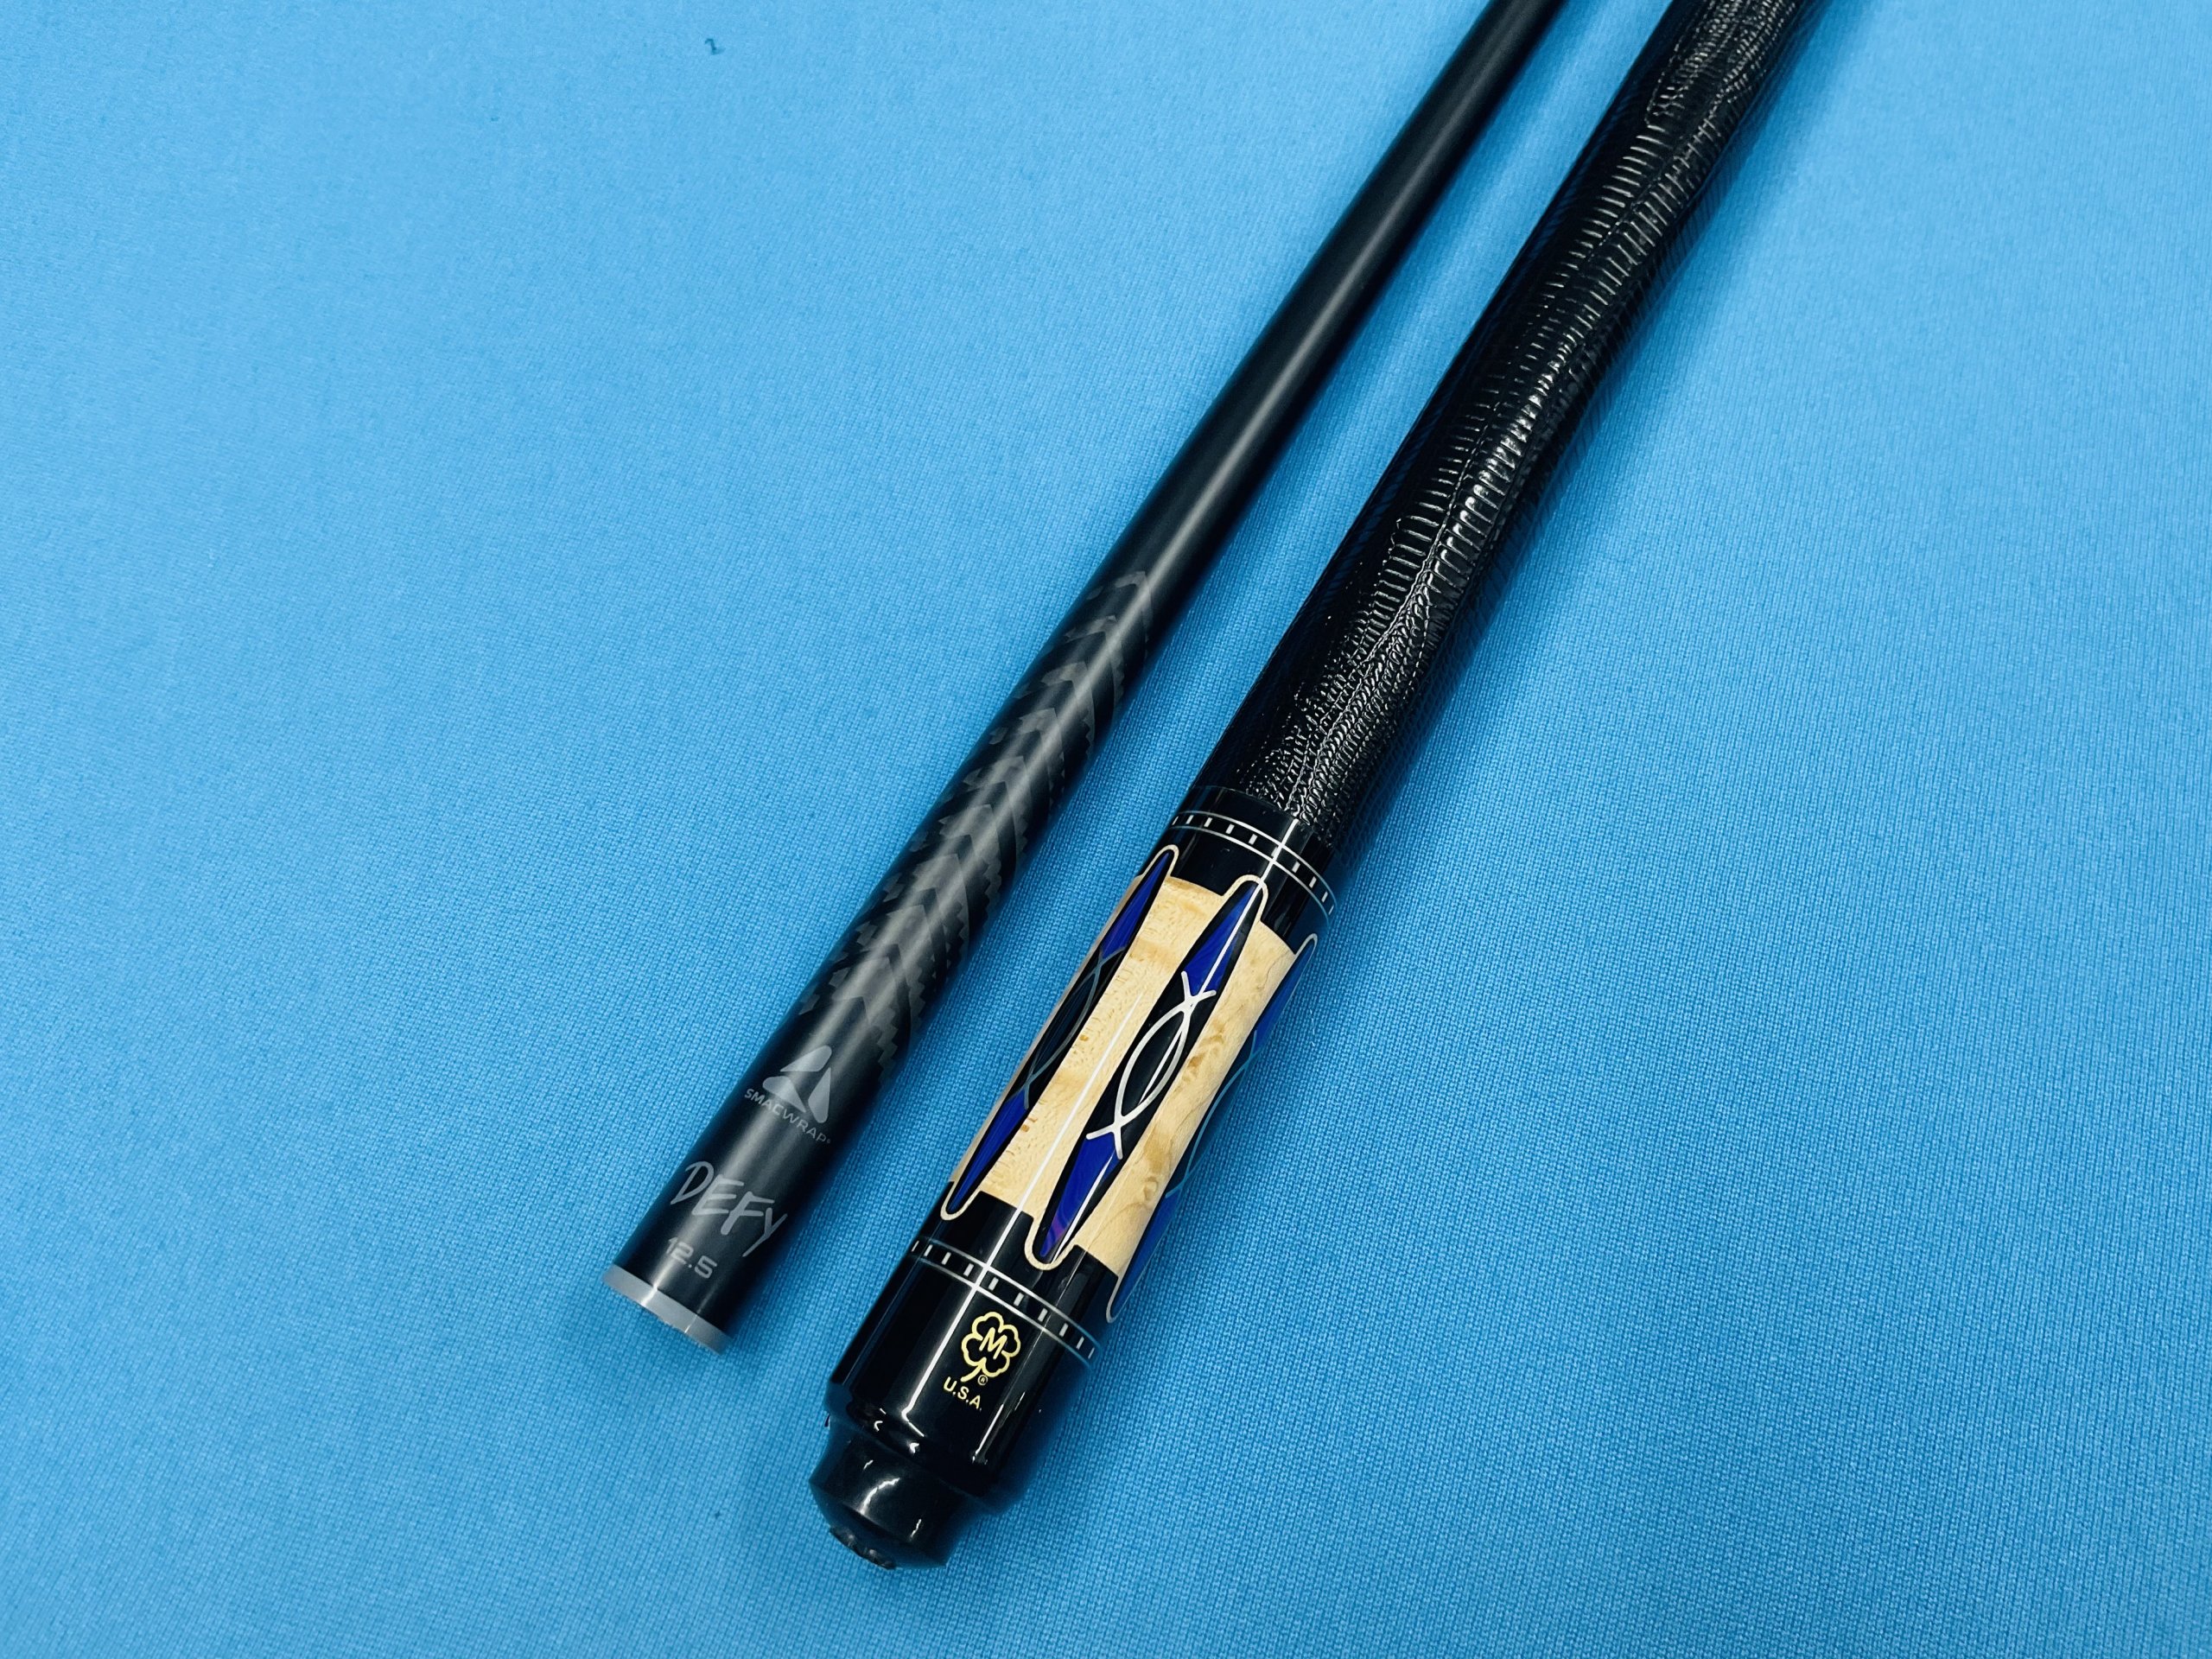 McDERMOTT CUE G703 WITH QUICK RELEASE JOINT & DEFY CARBON SHAFT 12.5 mm ...